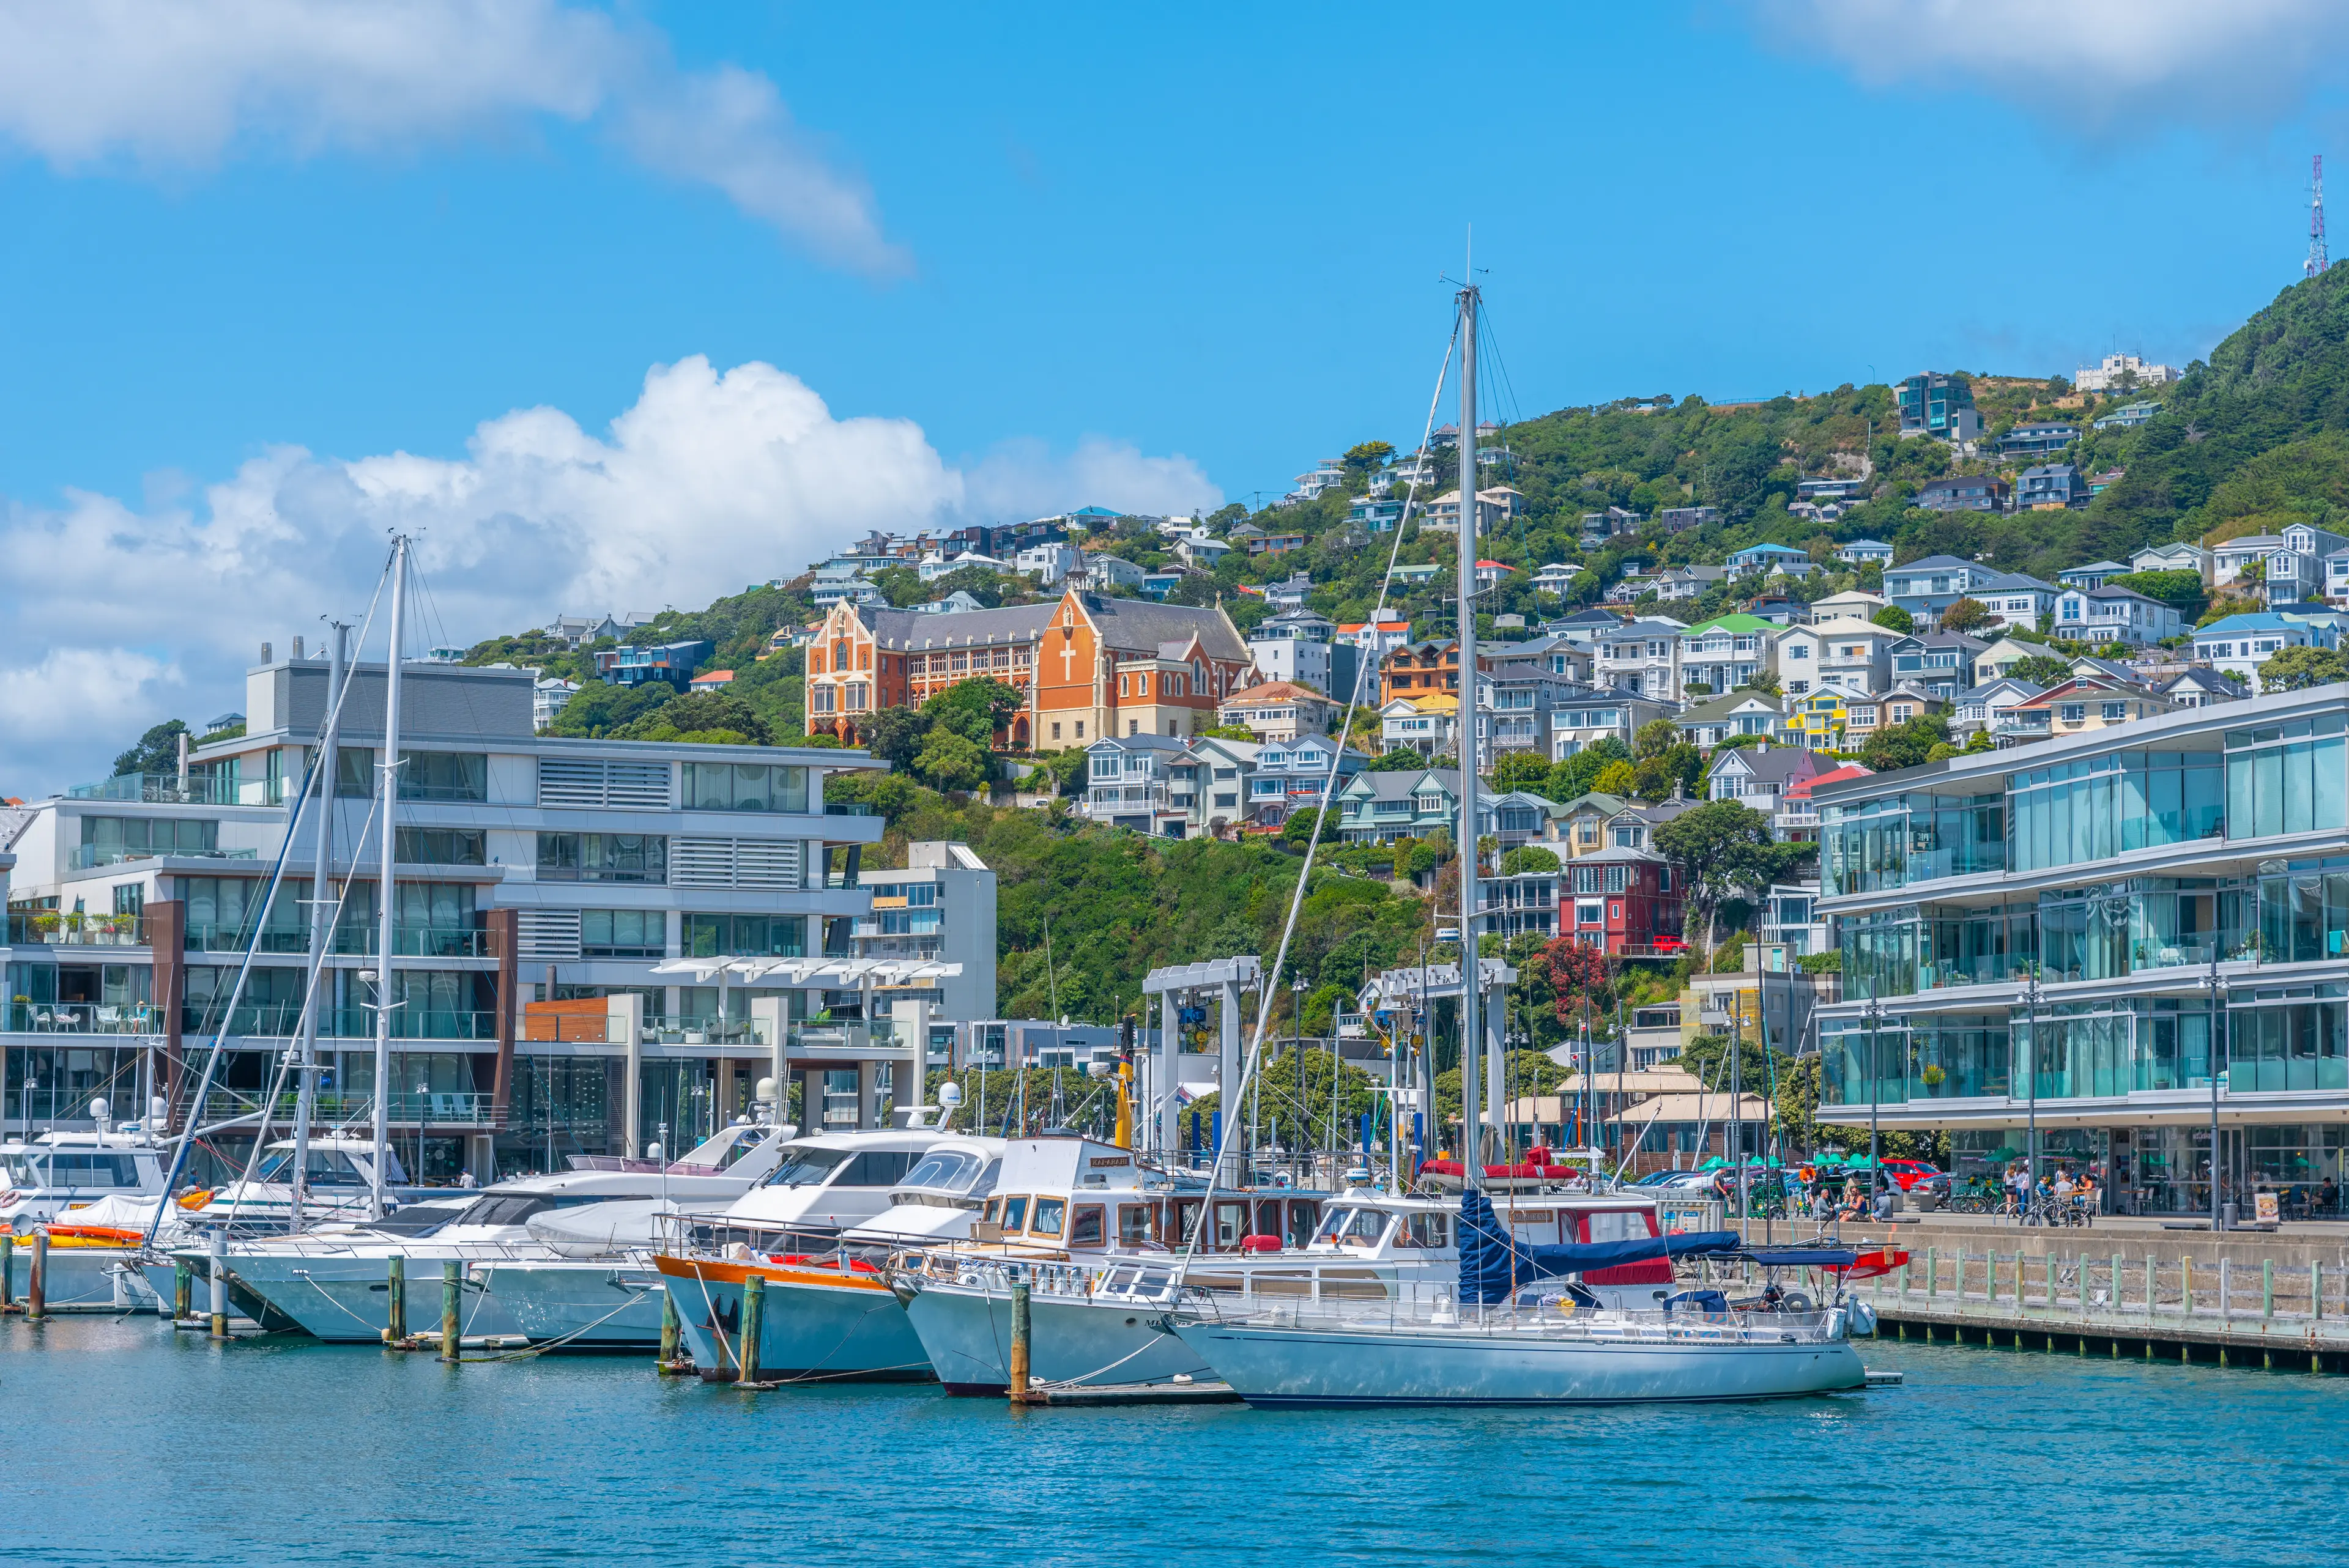 2-Day Family Outdoor & Relaxation Trip in Wellington, NZ